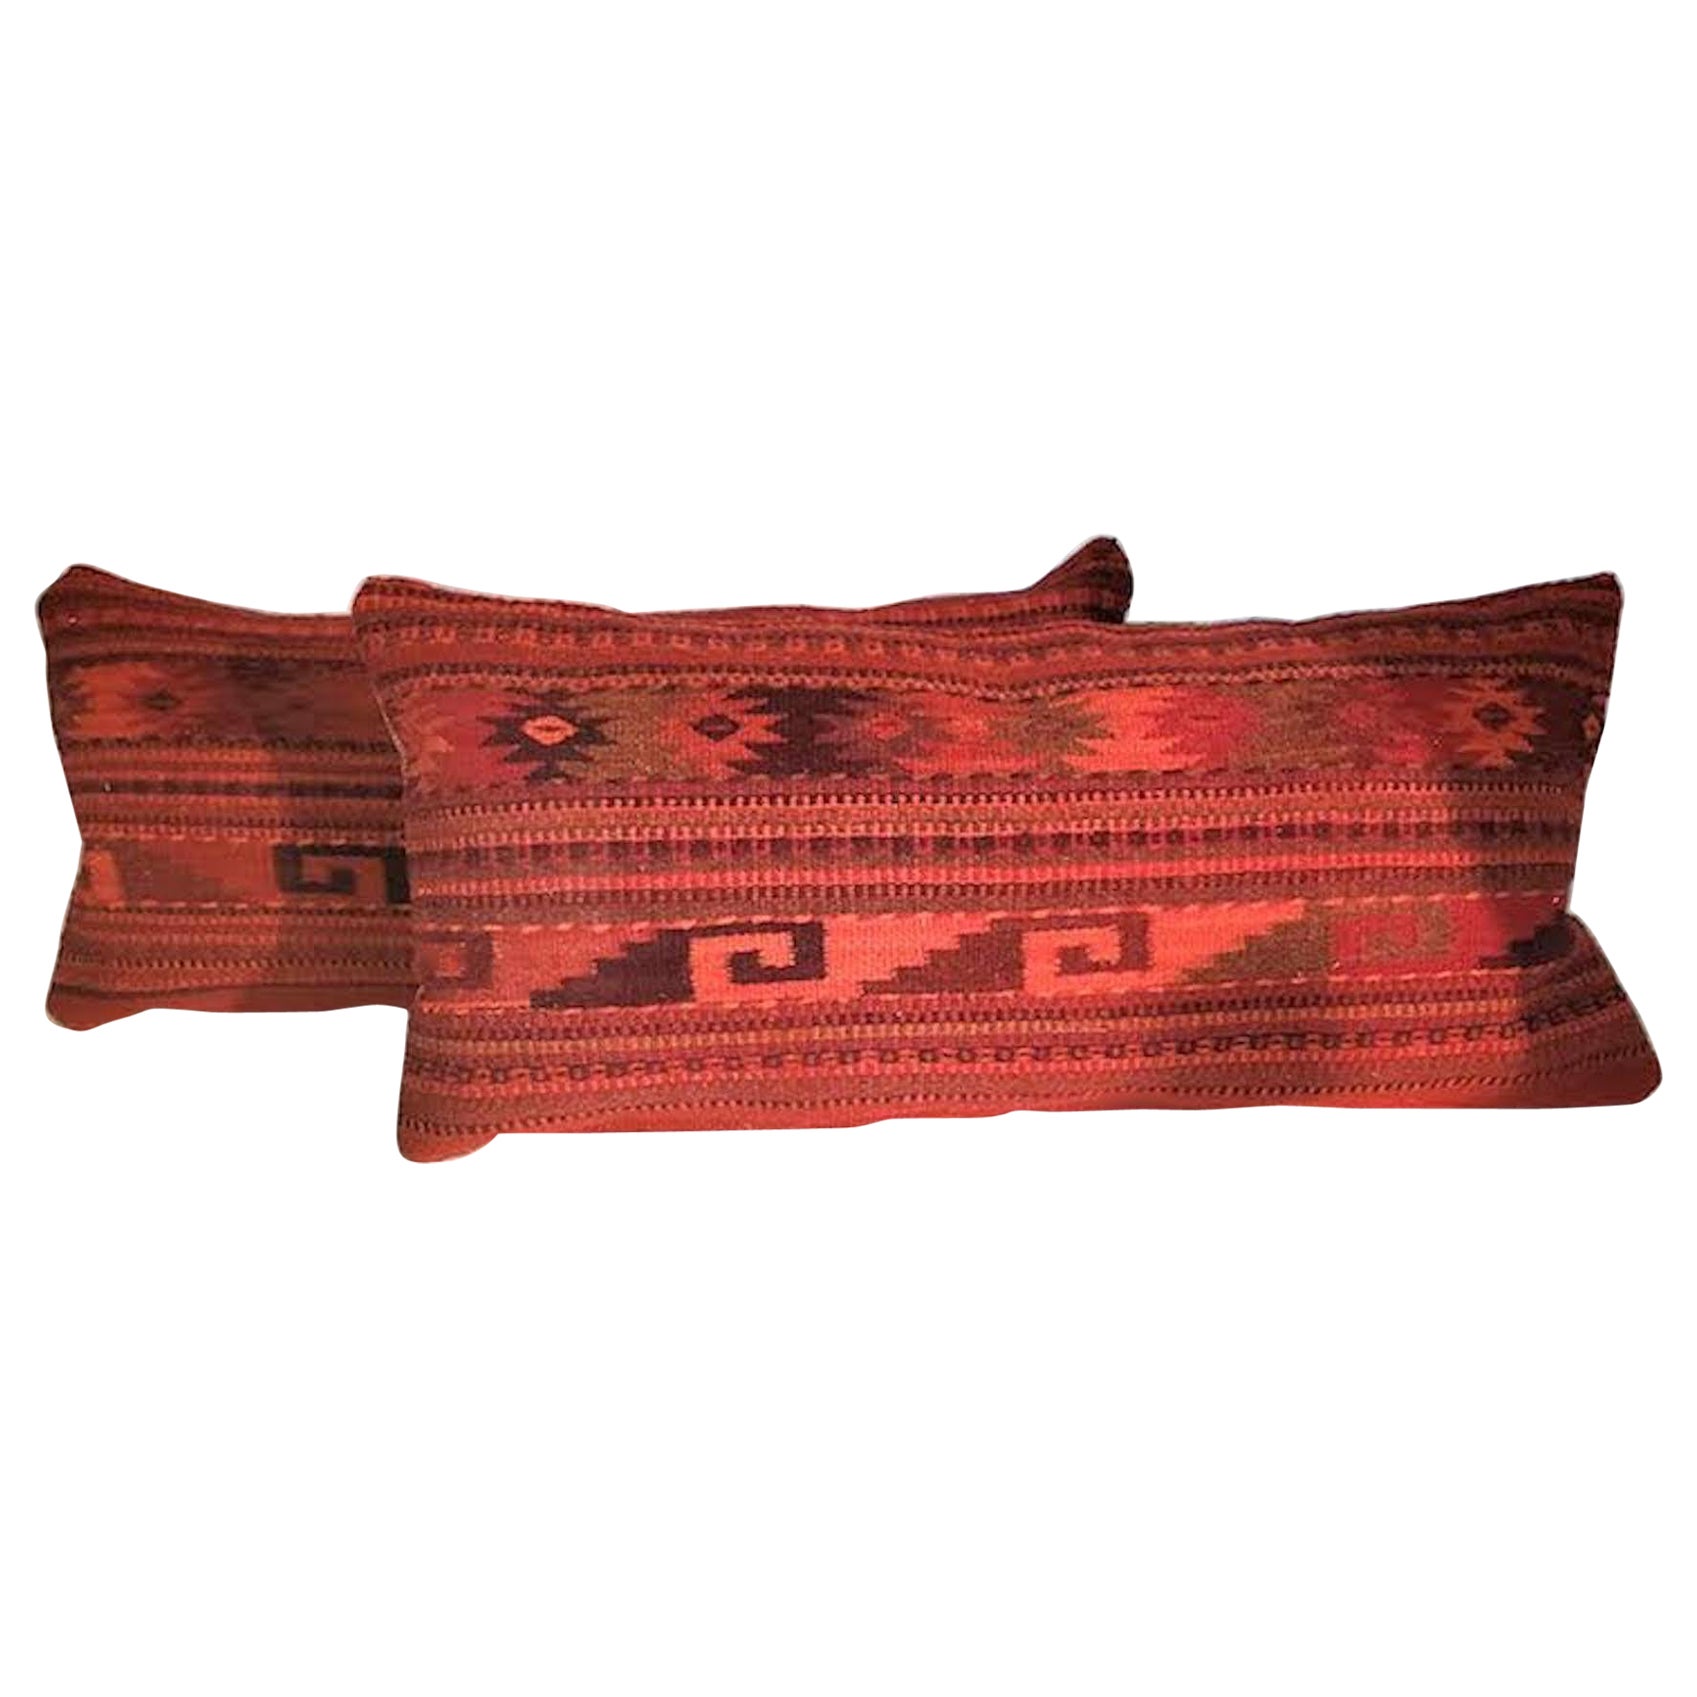 Red Mexican Indian Weaving Bolster Pillows - Pair